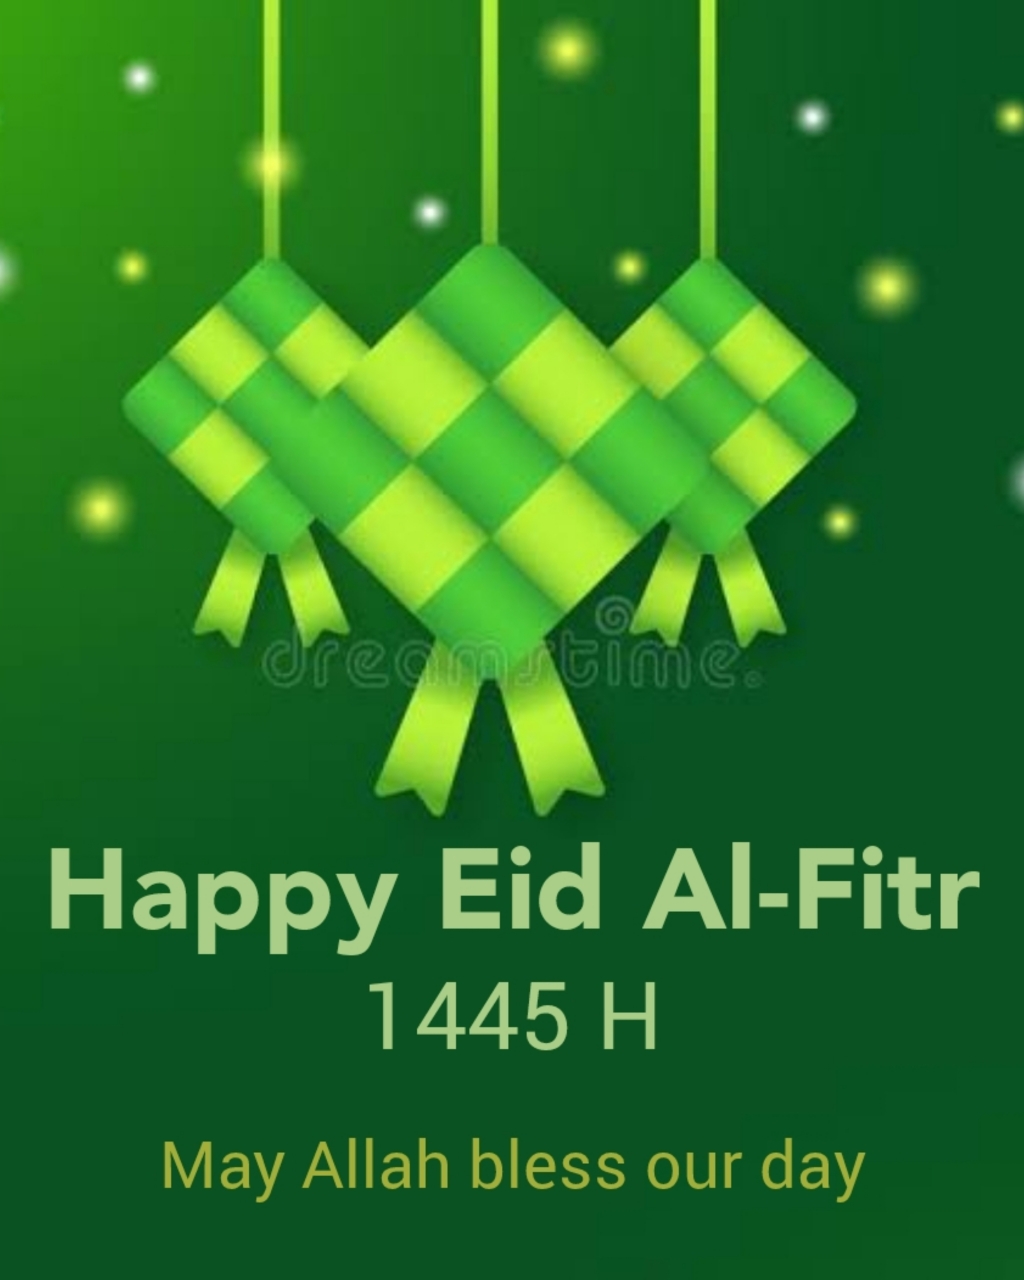 EID AL-FITR HOLIDAY: Dear good friends. During the Eid holiday, I will not be active on social media and blog. I apologize. Thx.